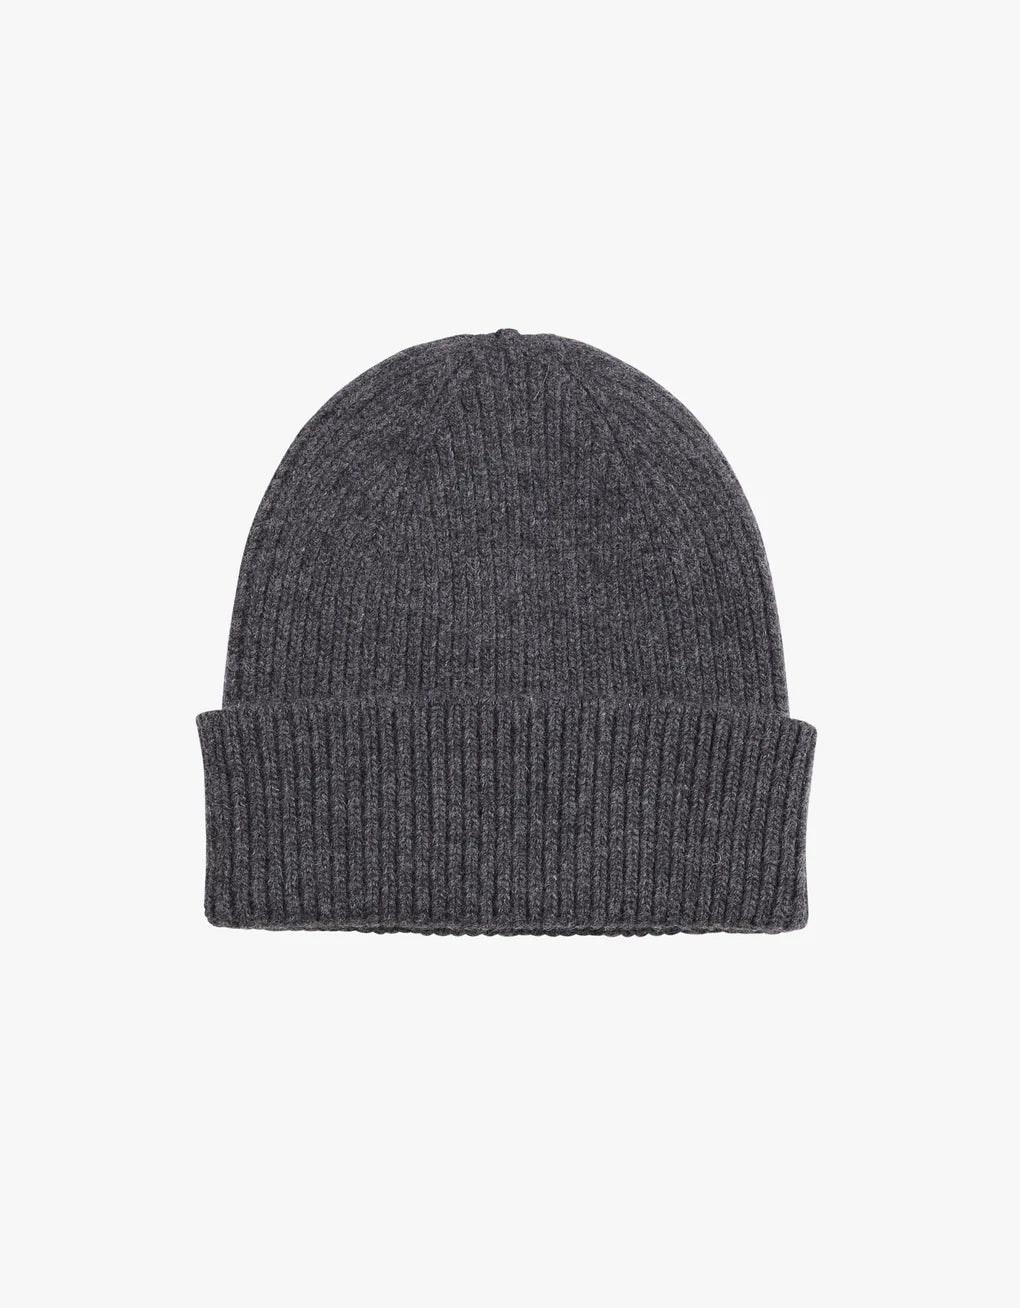 BEANIE BY COLORFUL STANDARD